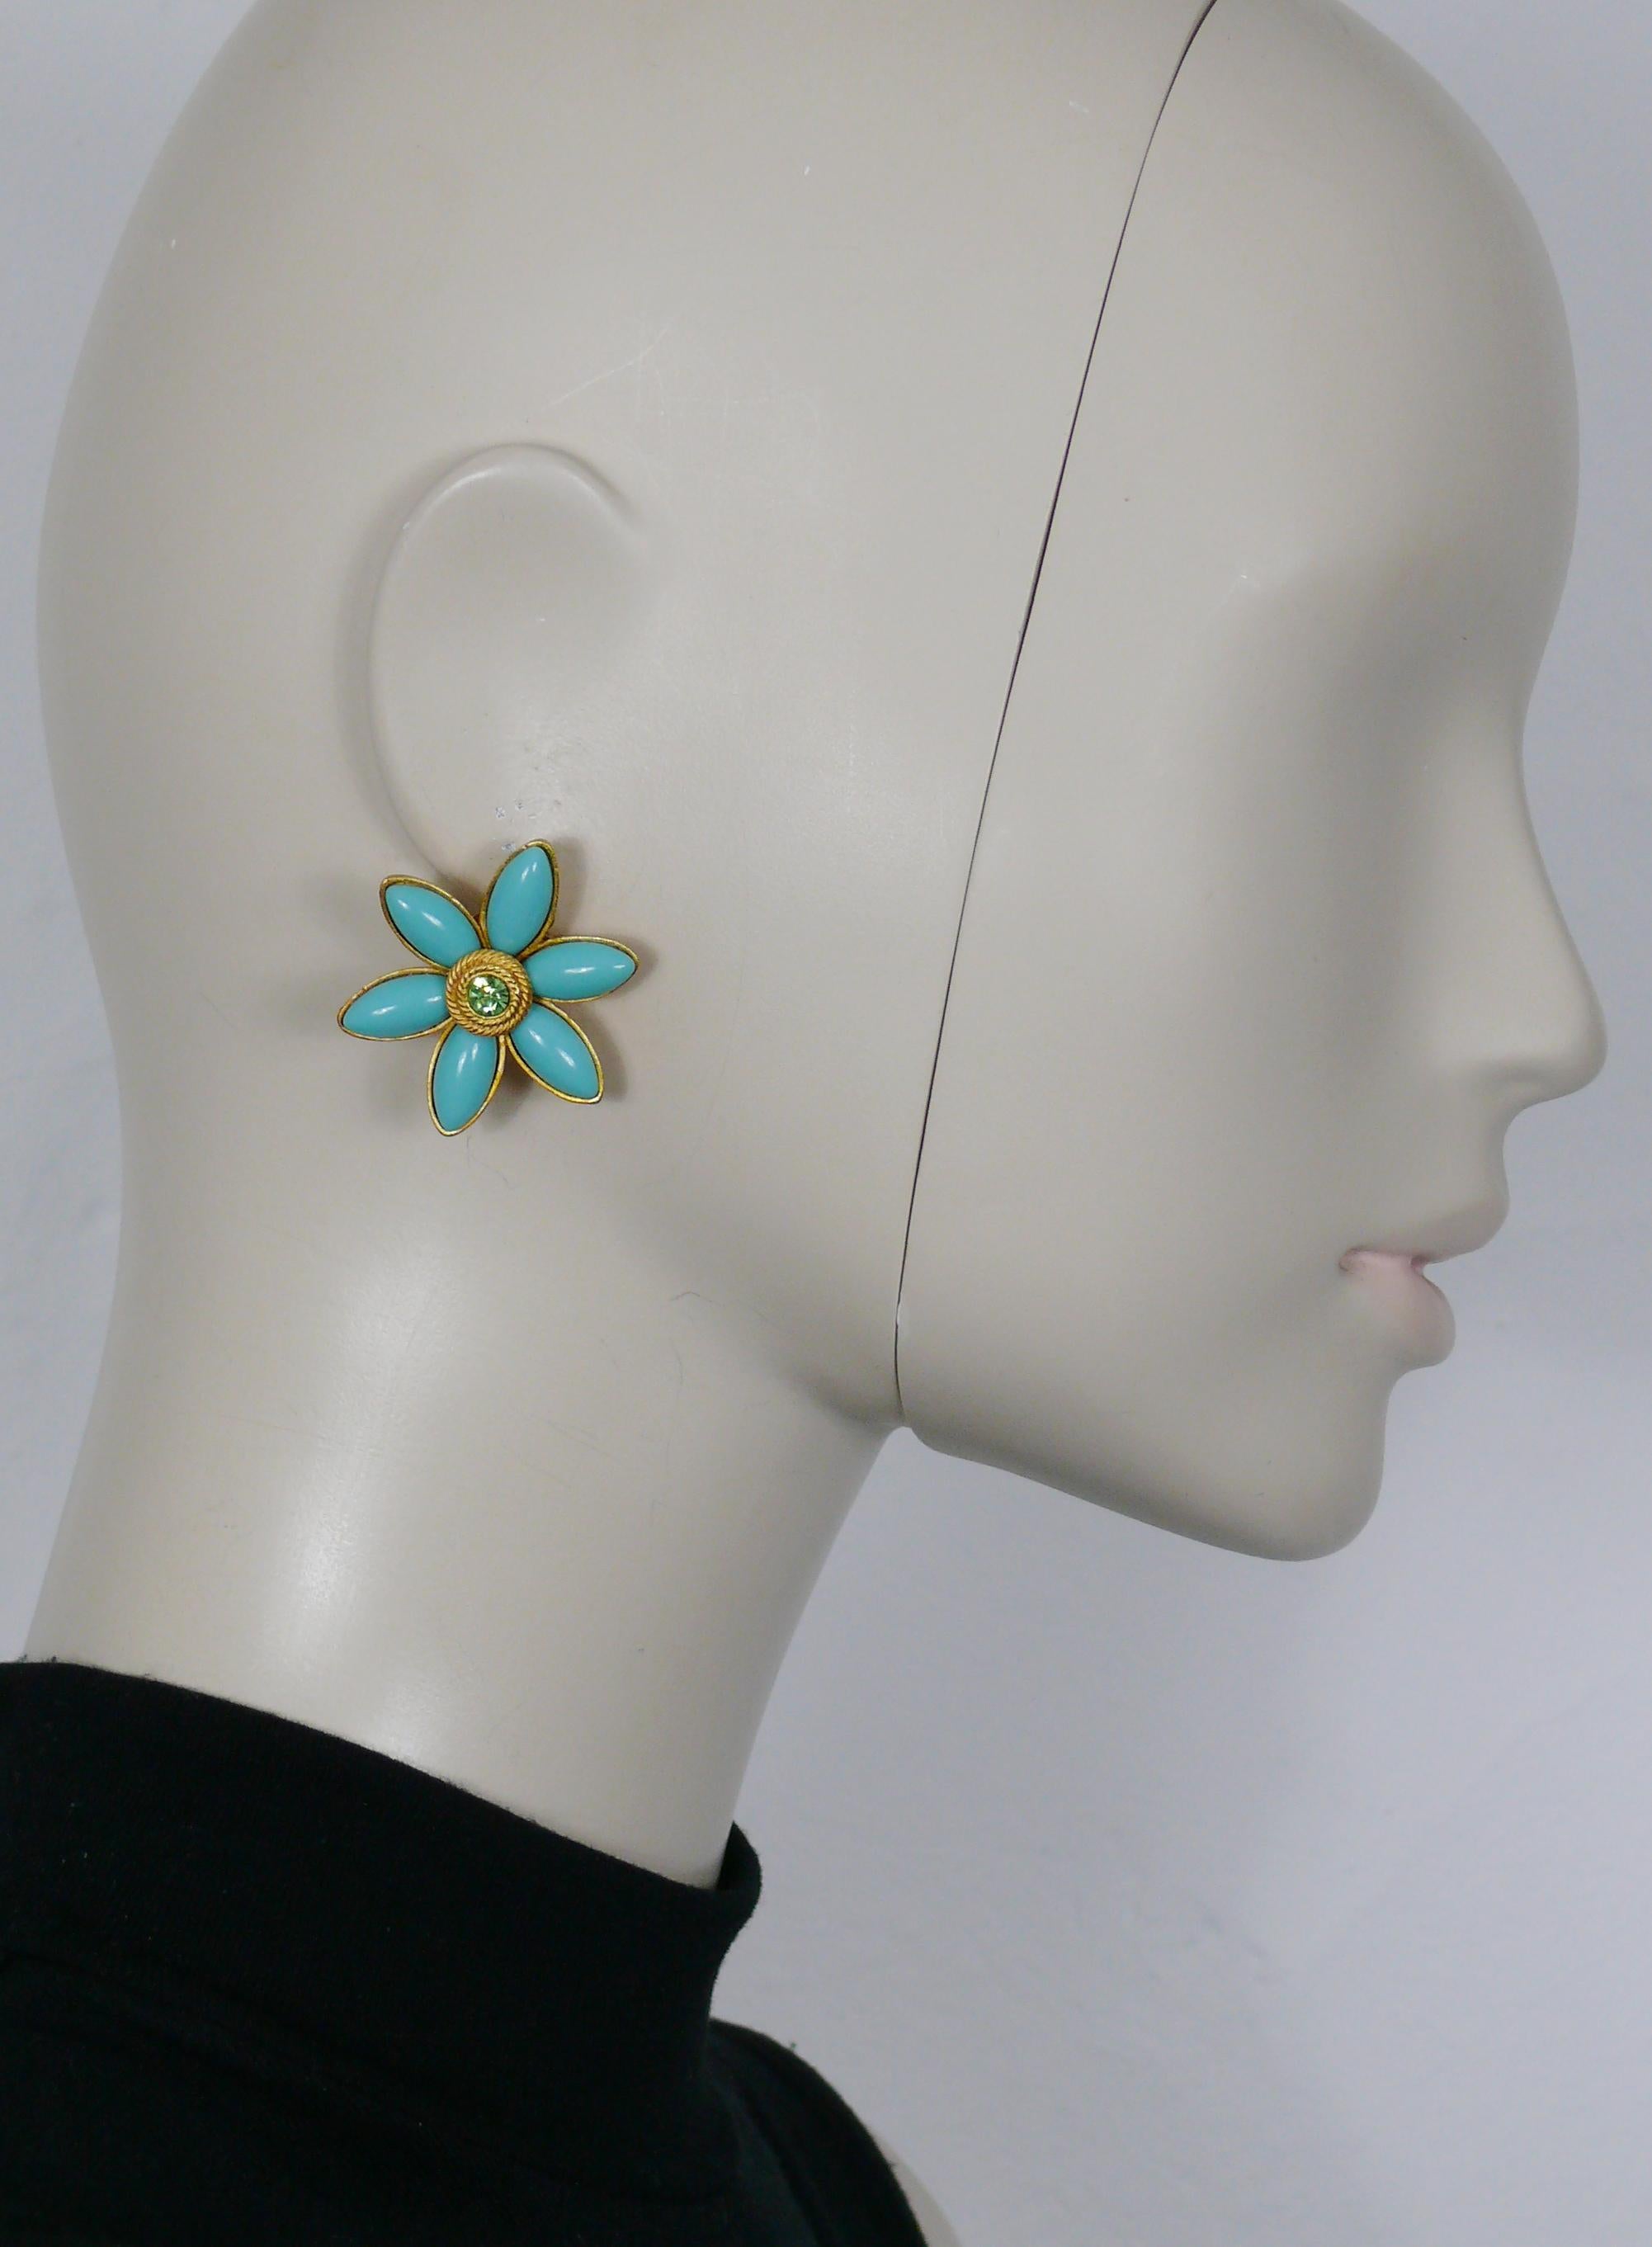 CHRISTIAN LACROIX vintage gold tone metal flower clip-on earrings embellished with turquoise colour glass cabochon petals and a green crystal.

Marked CHRISTIAN LACROIX CL Made in France.

Indicative measurements : approx. 3.7 cm x 3.5 cm (1.46